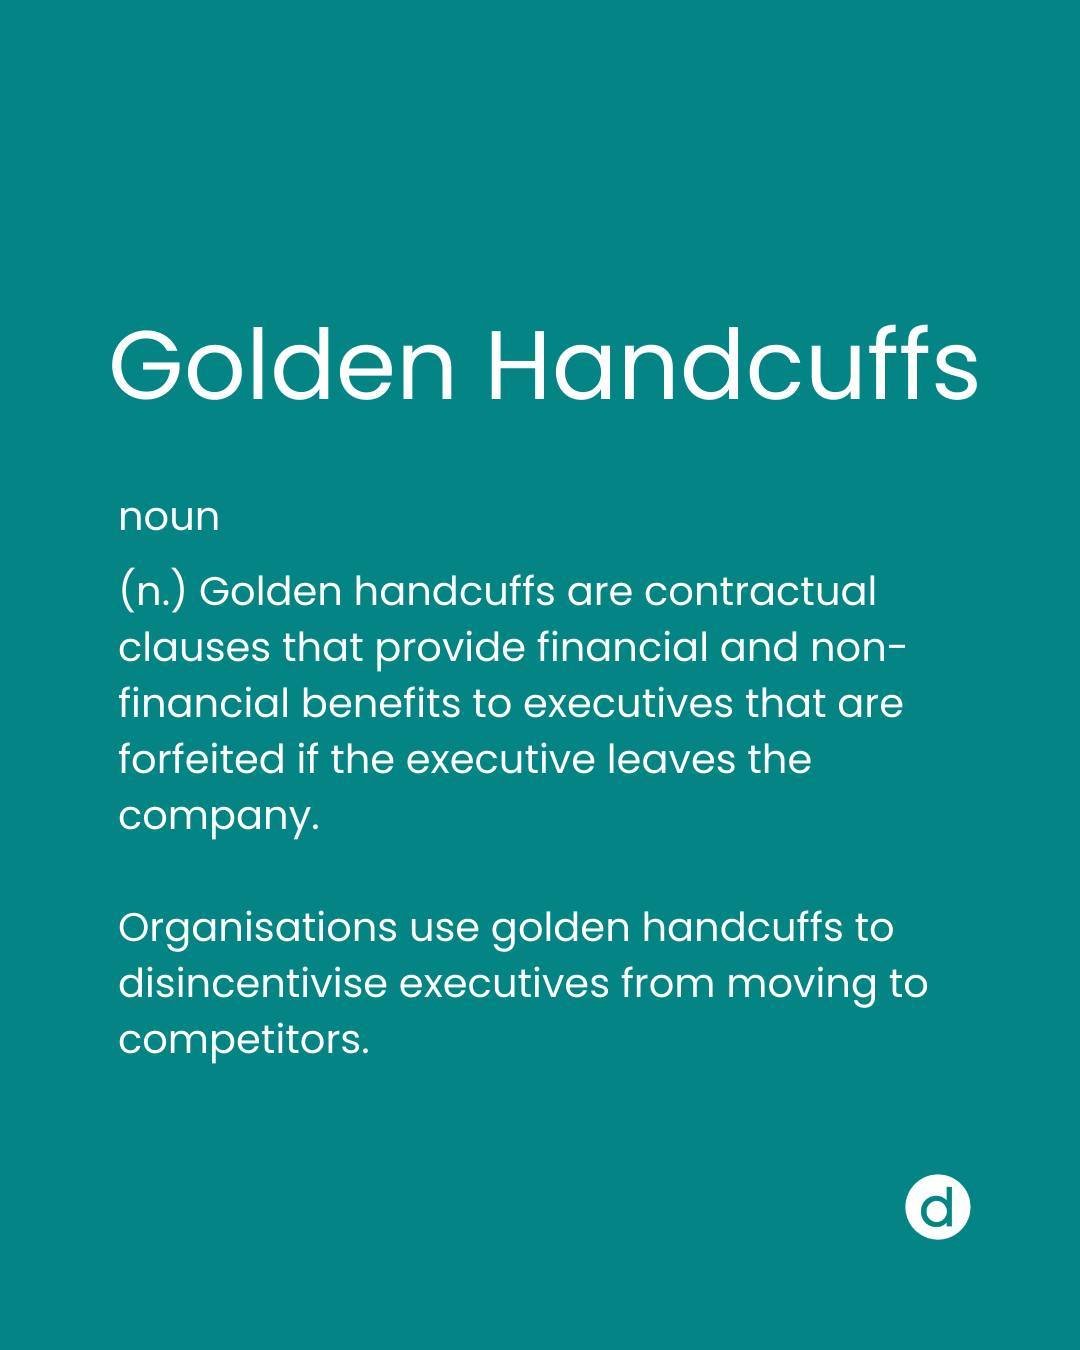 How well do you know your HR terminology? 📝 

We want to ensure you understand every matter that comes up in your day-to-day work. 

Today we're featuring: Golden Handcuffs

🏴󠁧󠁢󠁷󠁬󠁳󠁿 

Pa mor dda ydych chi'n gwybod eich terminoleg AD? 📝

Rydy